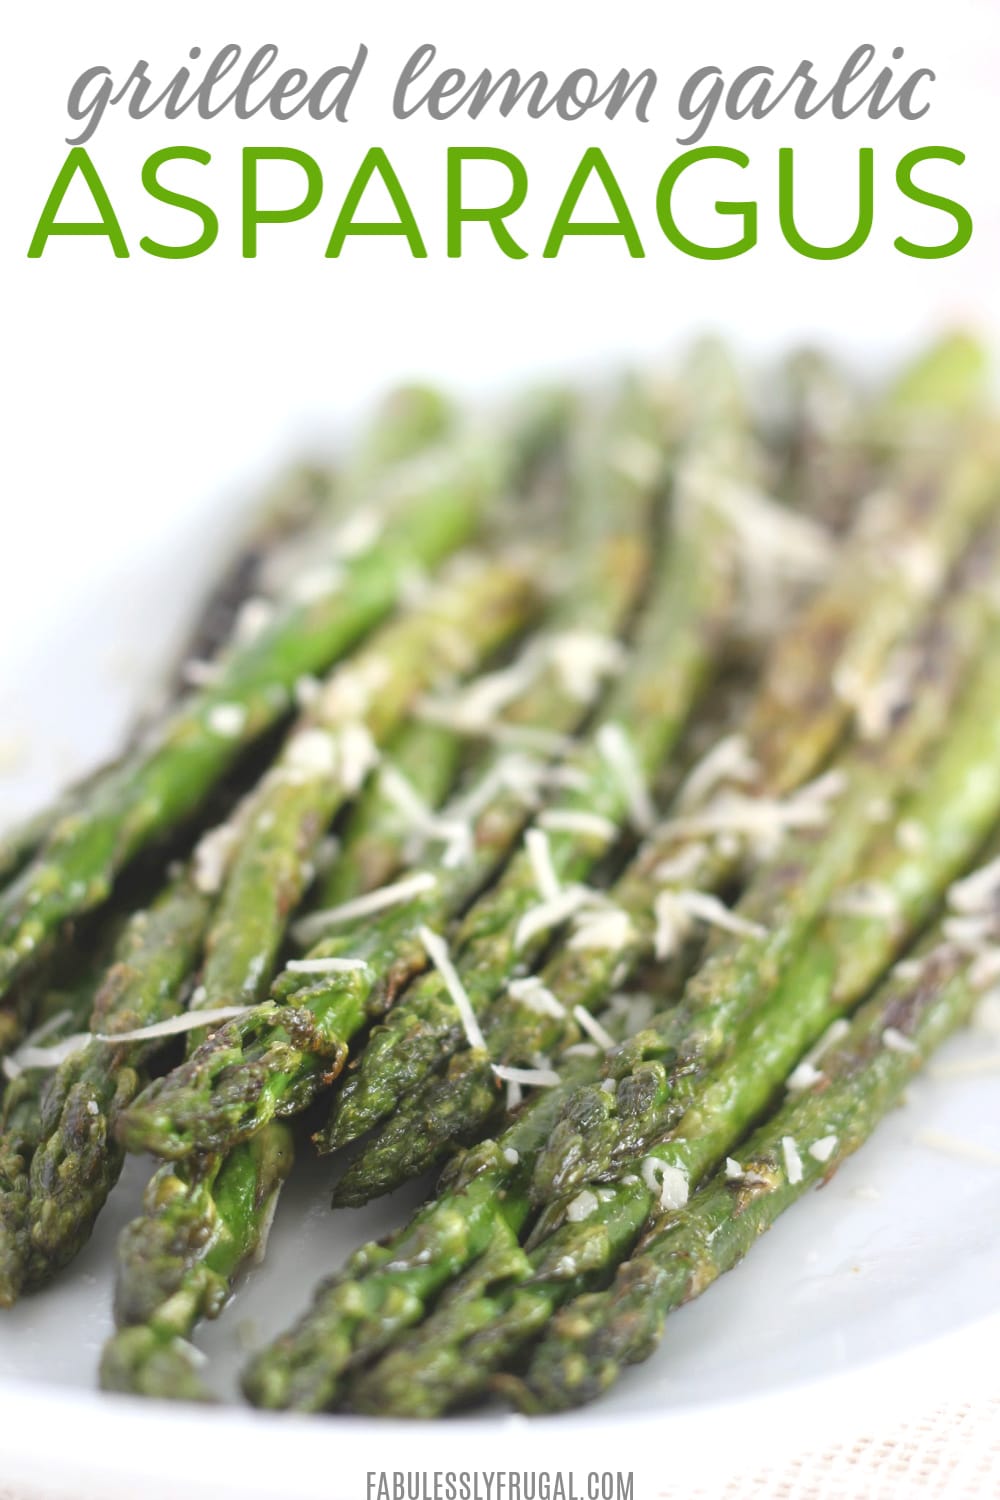 grilled asparagus with lemon and garlic recipe